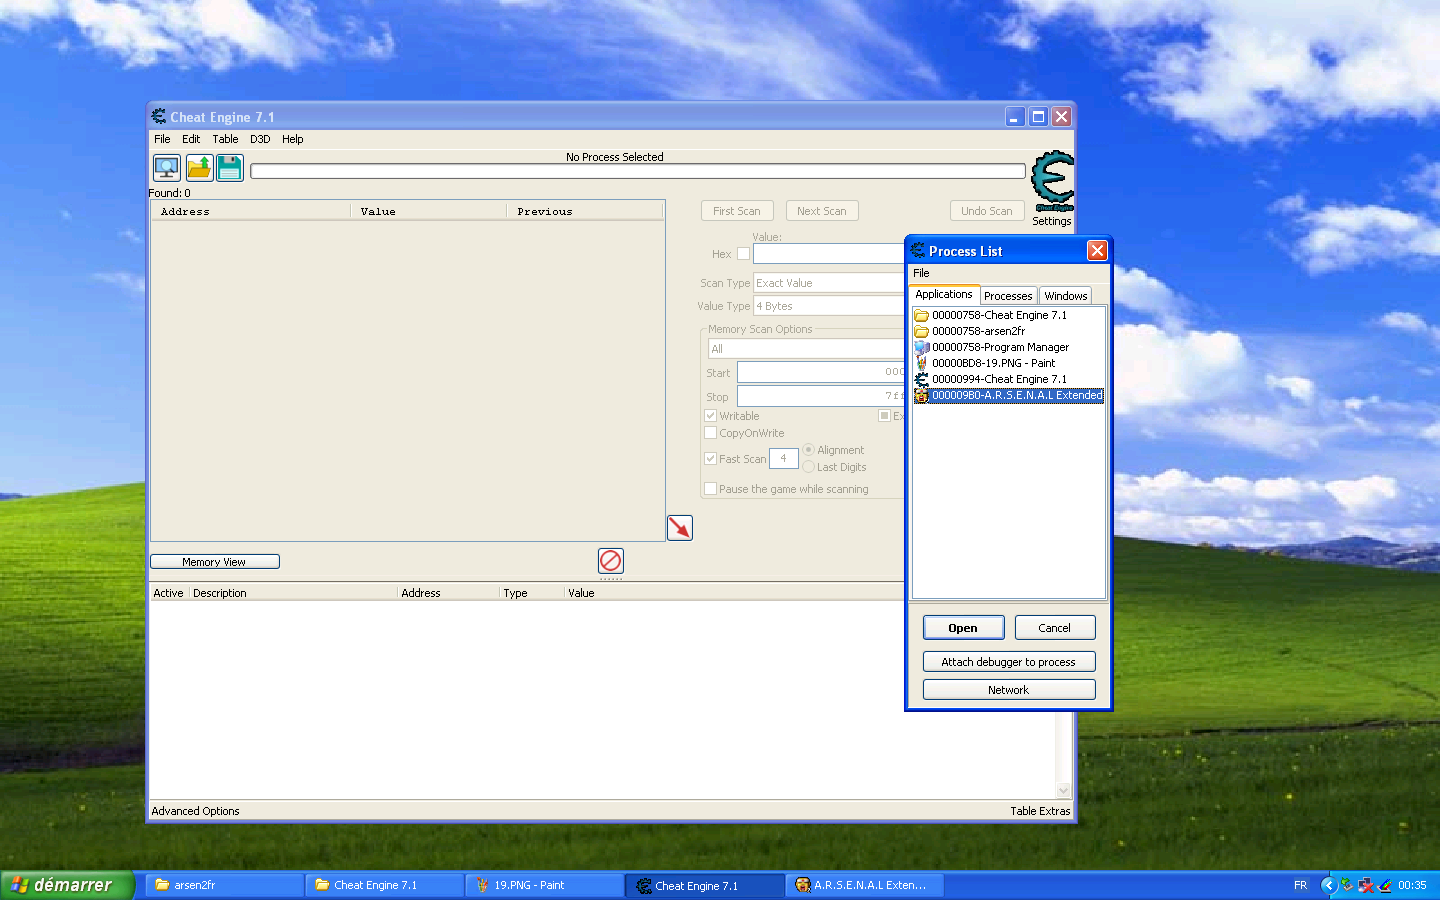 Cheat engine window showing the process selection